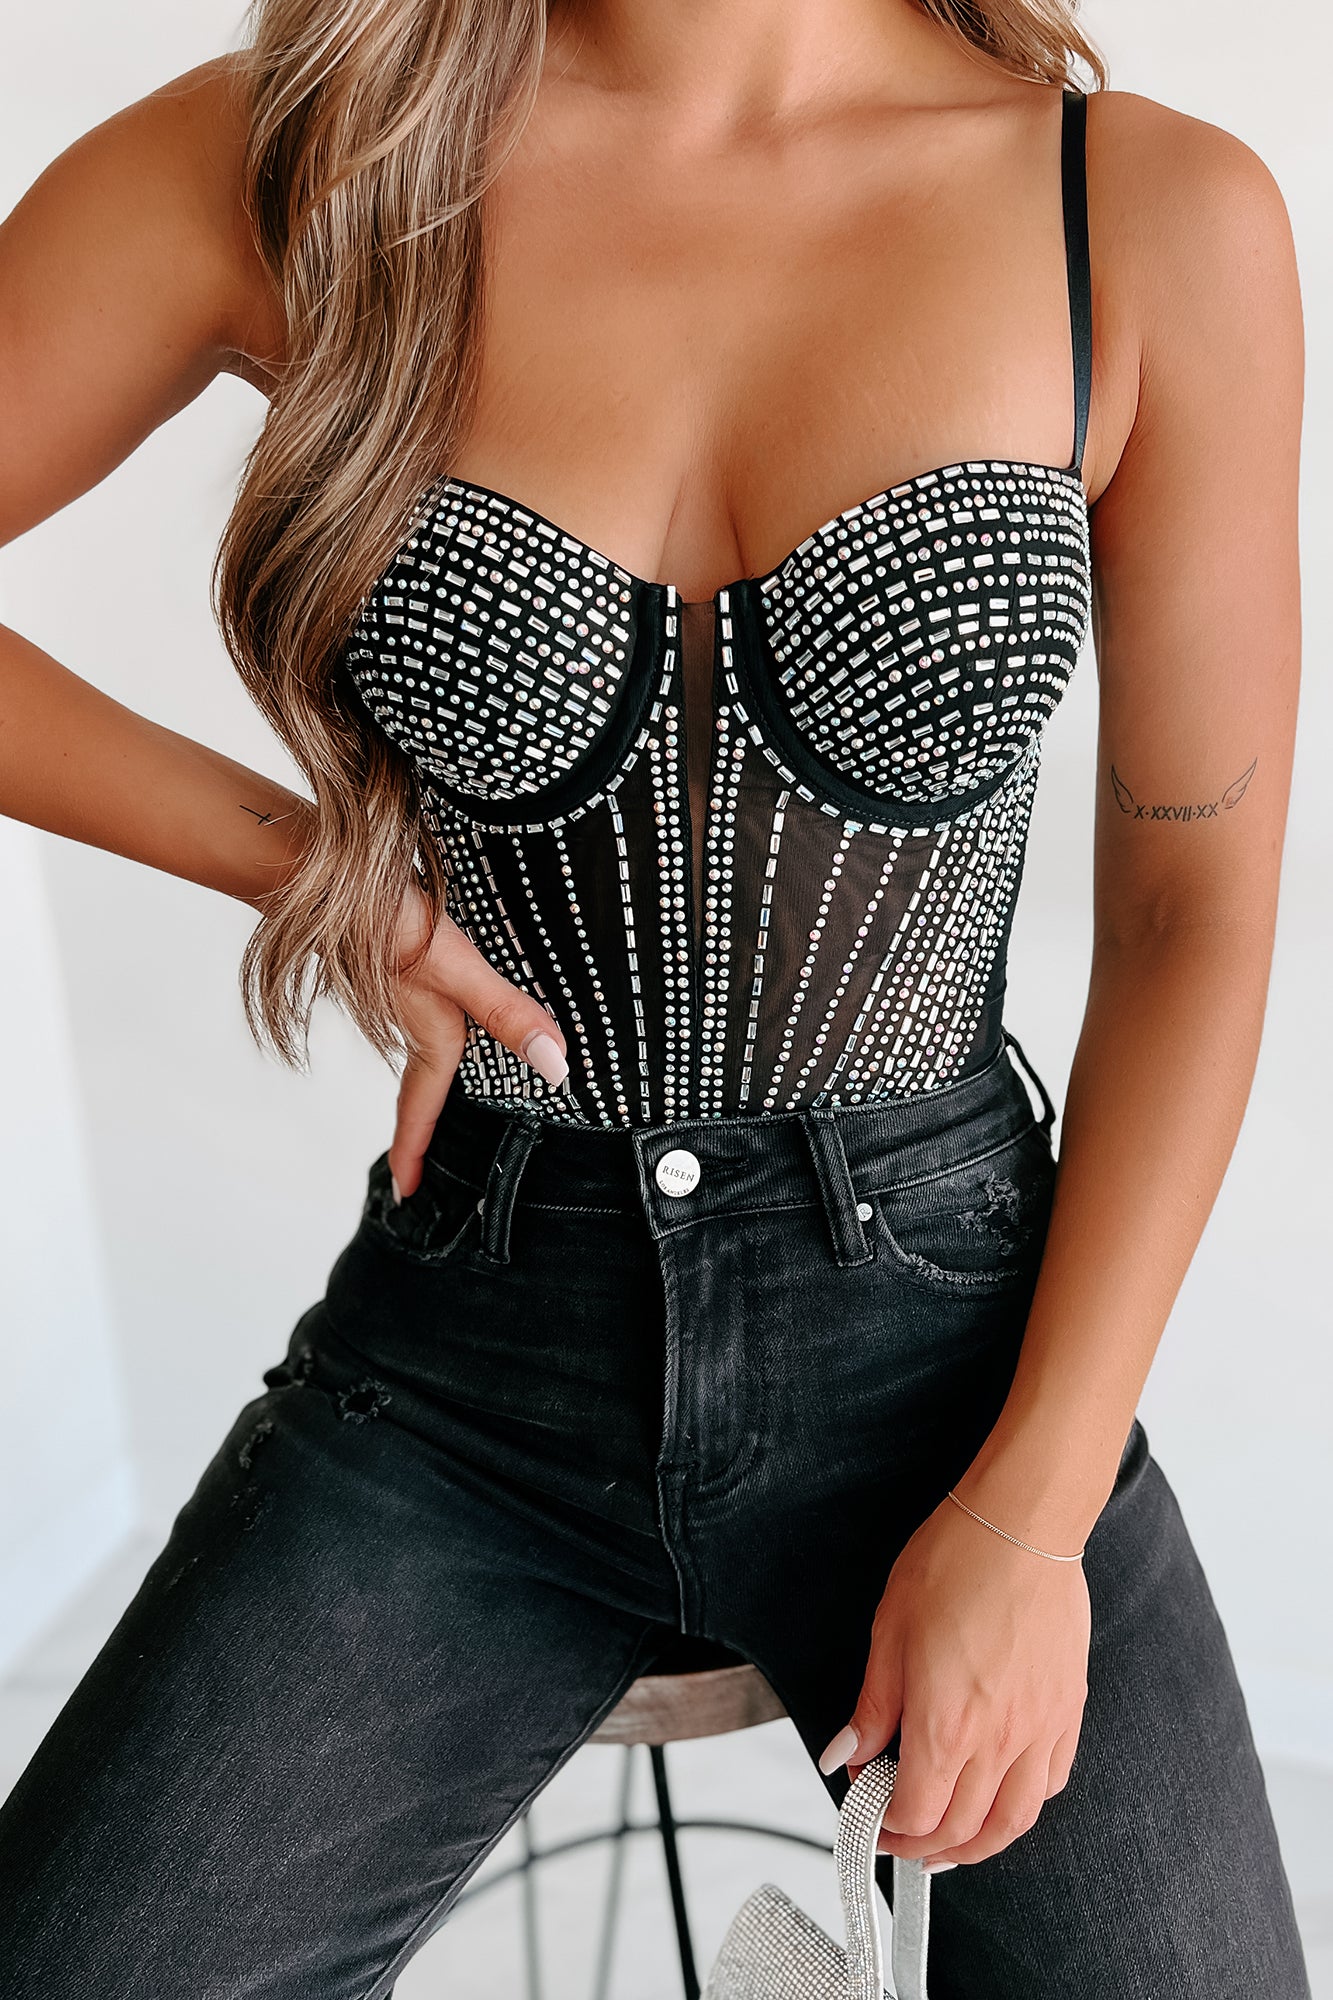 Are you in the market to purchase an Keep Up Babe Sleeveless Rhinestone  Mesh Romper (Black) Banjul ? Purchase now, before they are gone